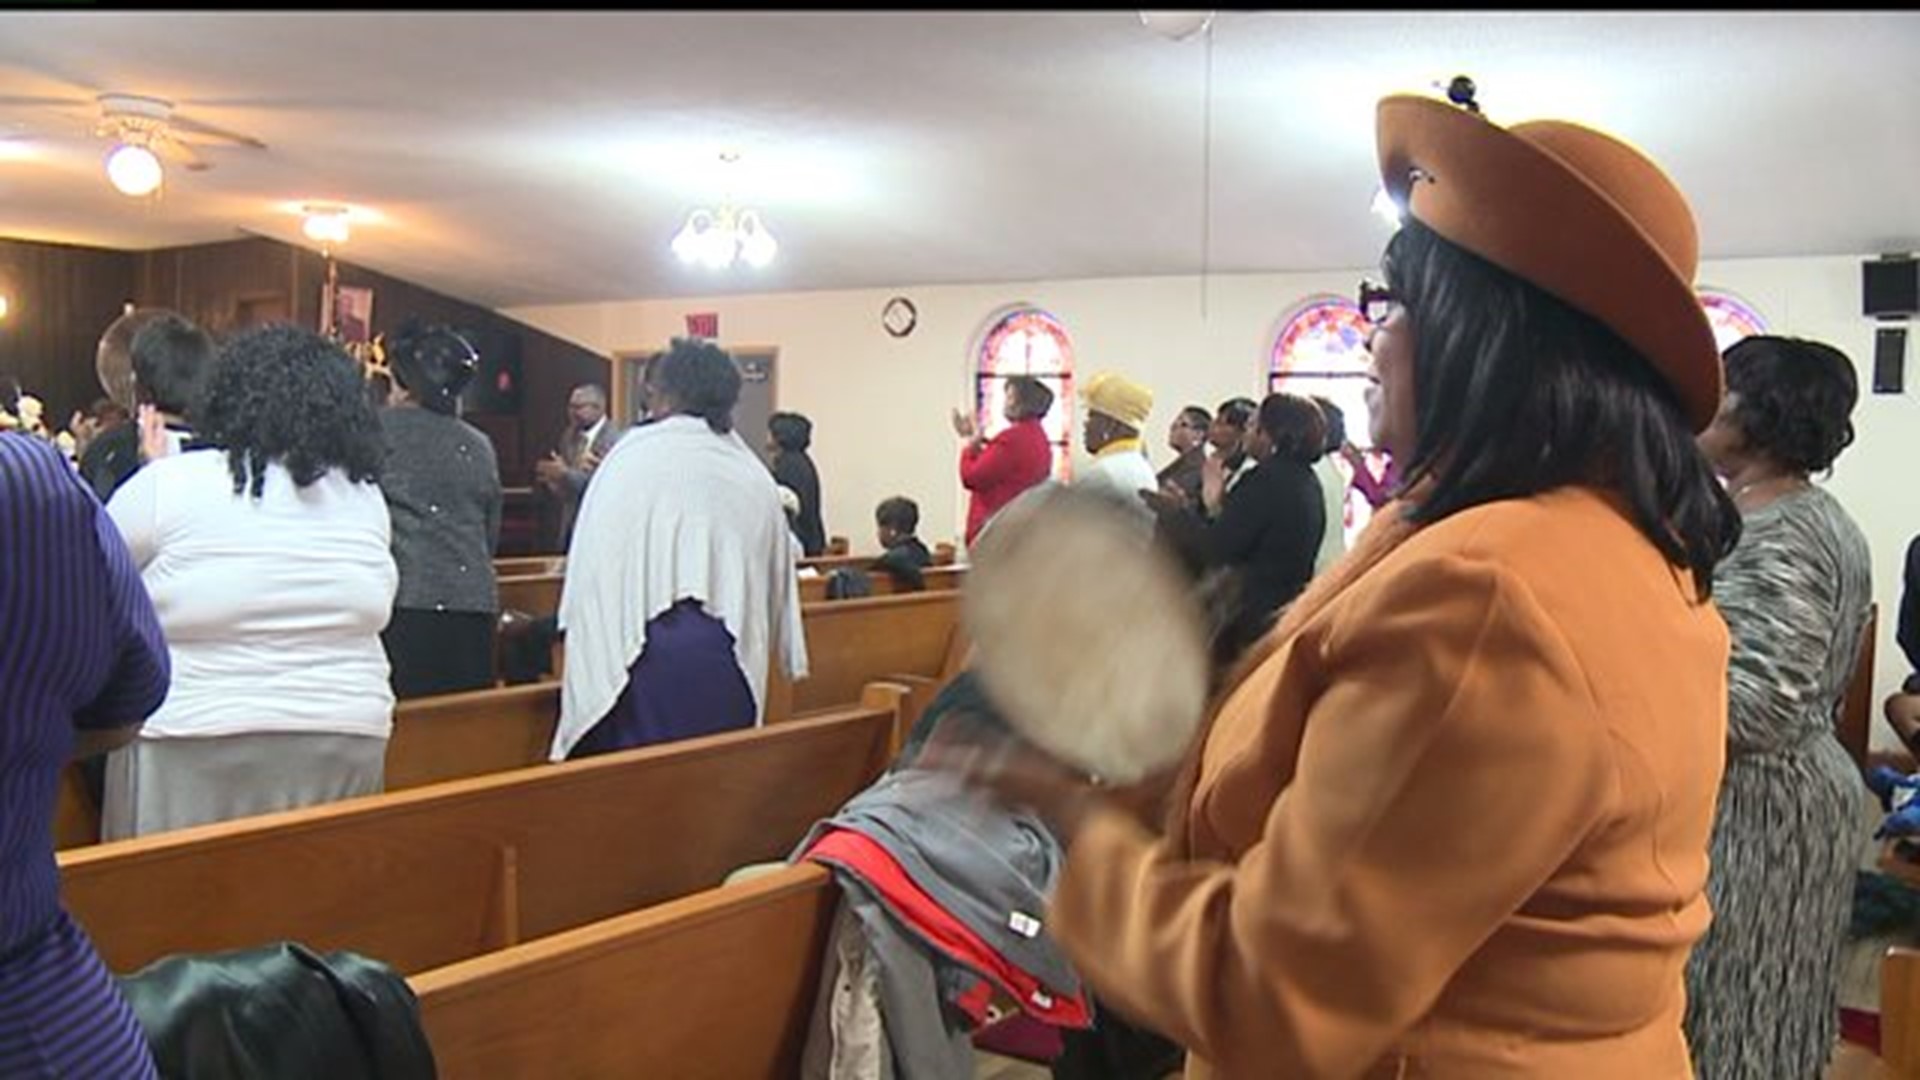 Harrisburg Church Congregation Comes Together after Fire